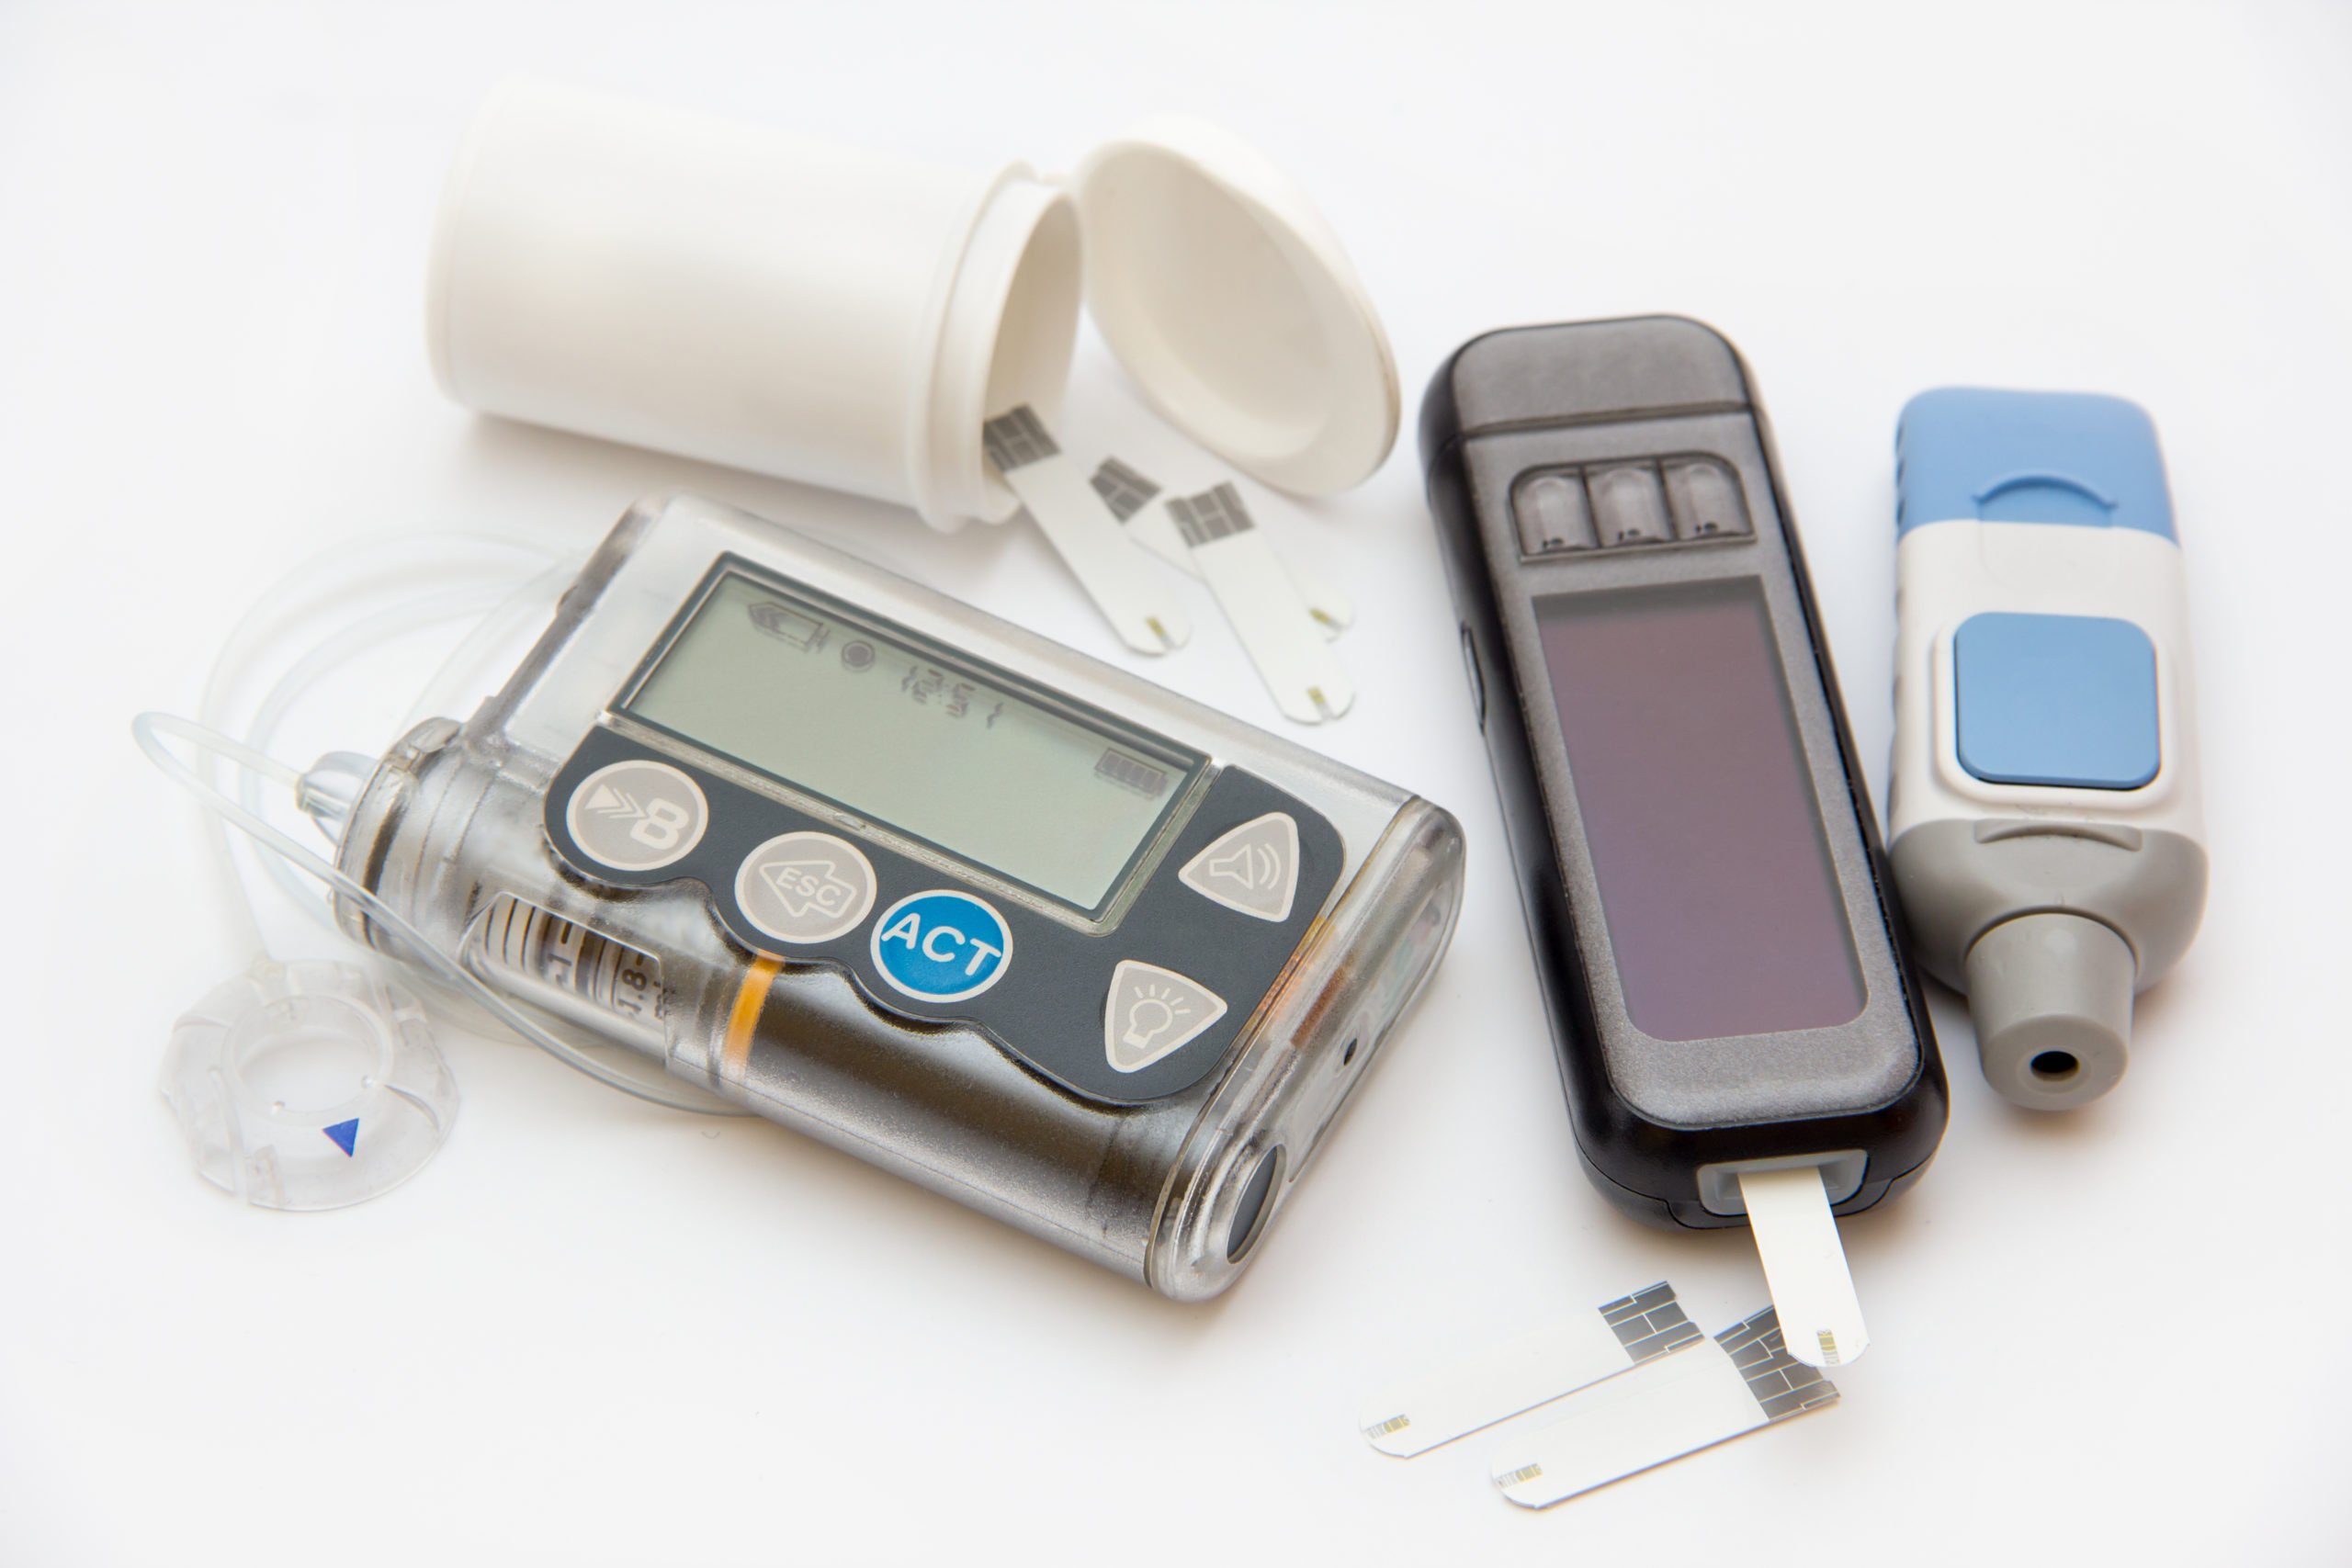 Tips for Buying and Using Diabetes Supplies